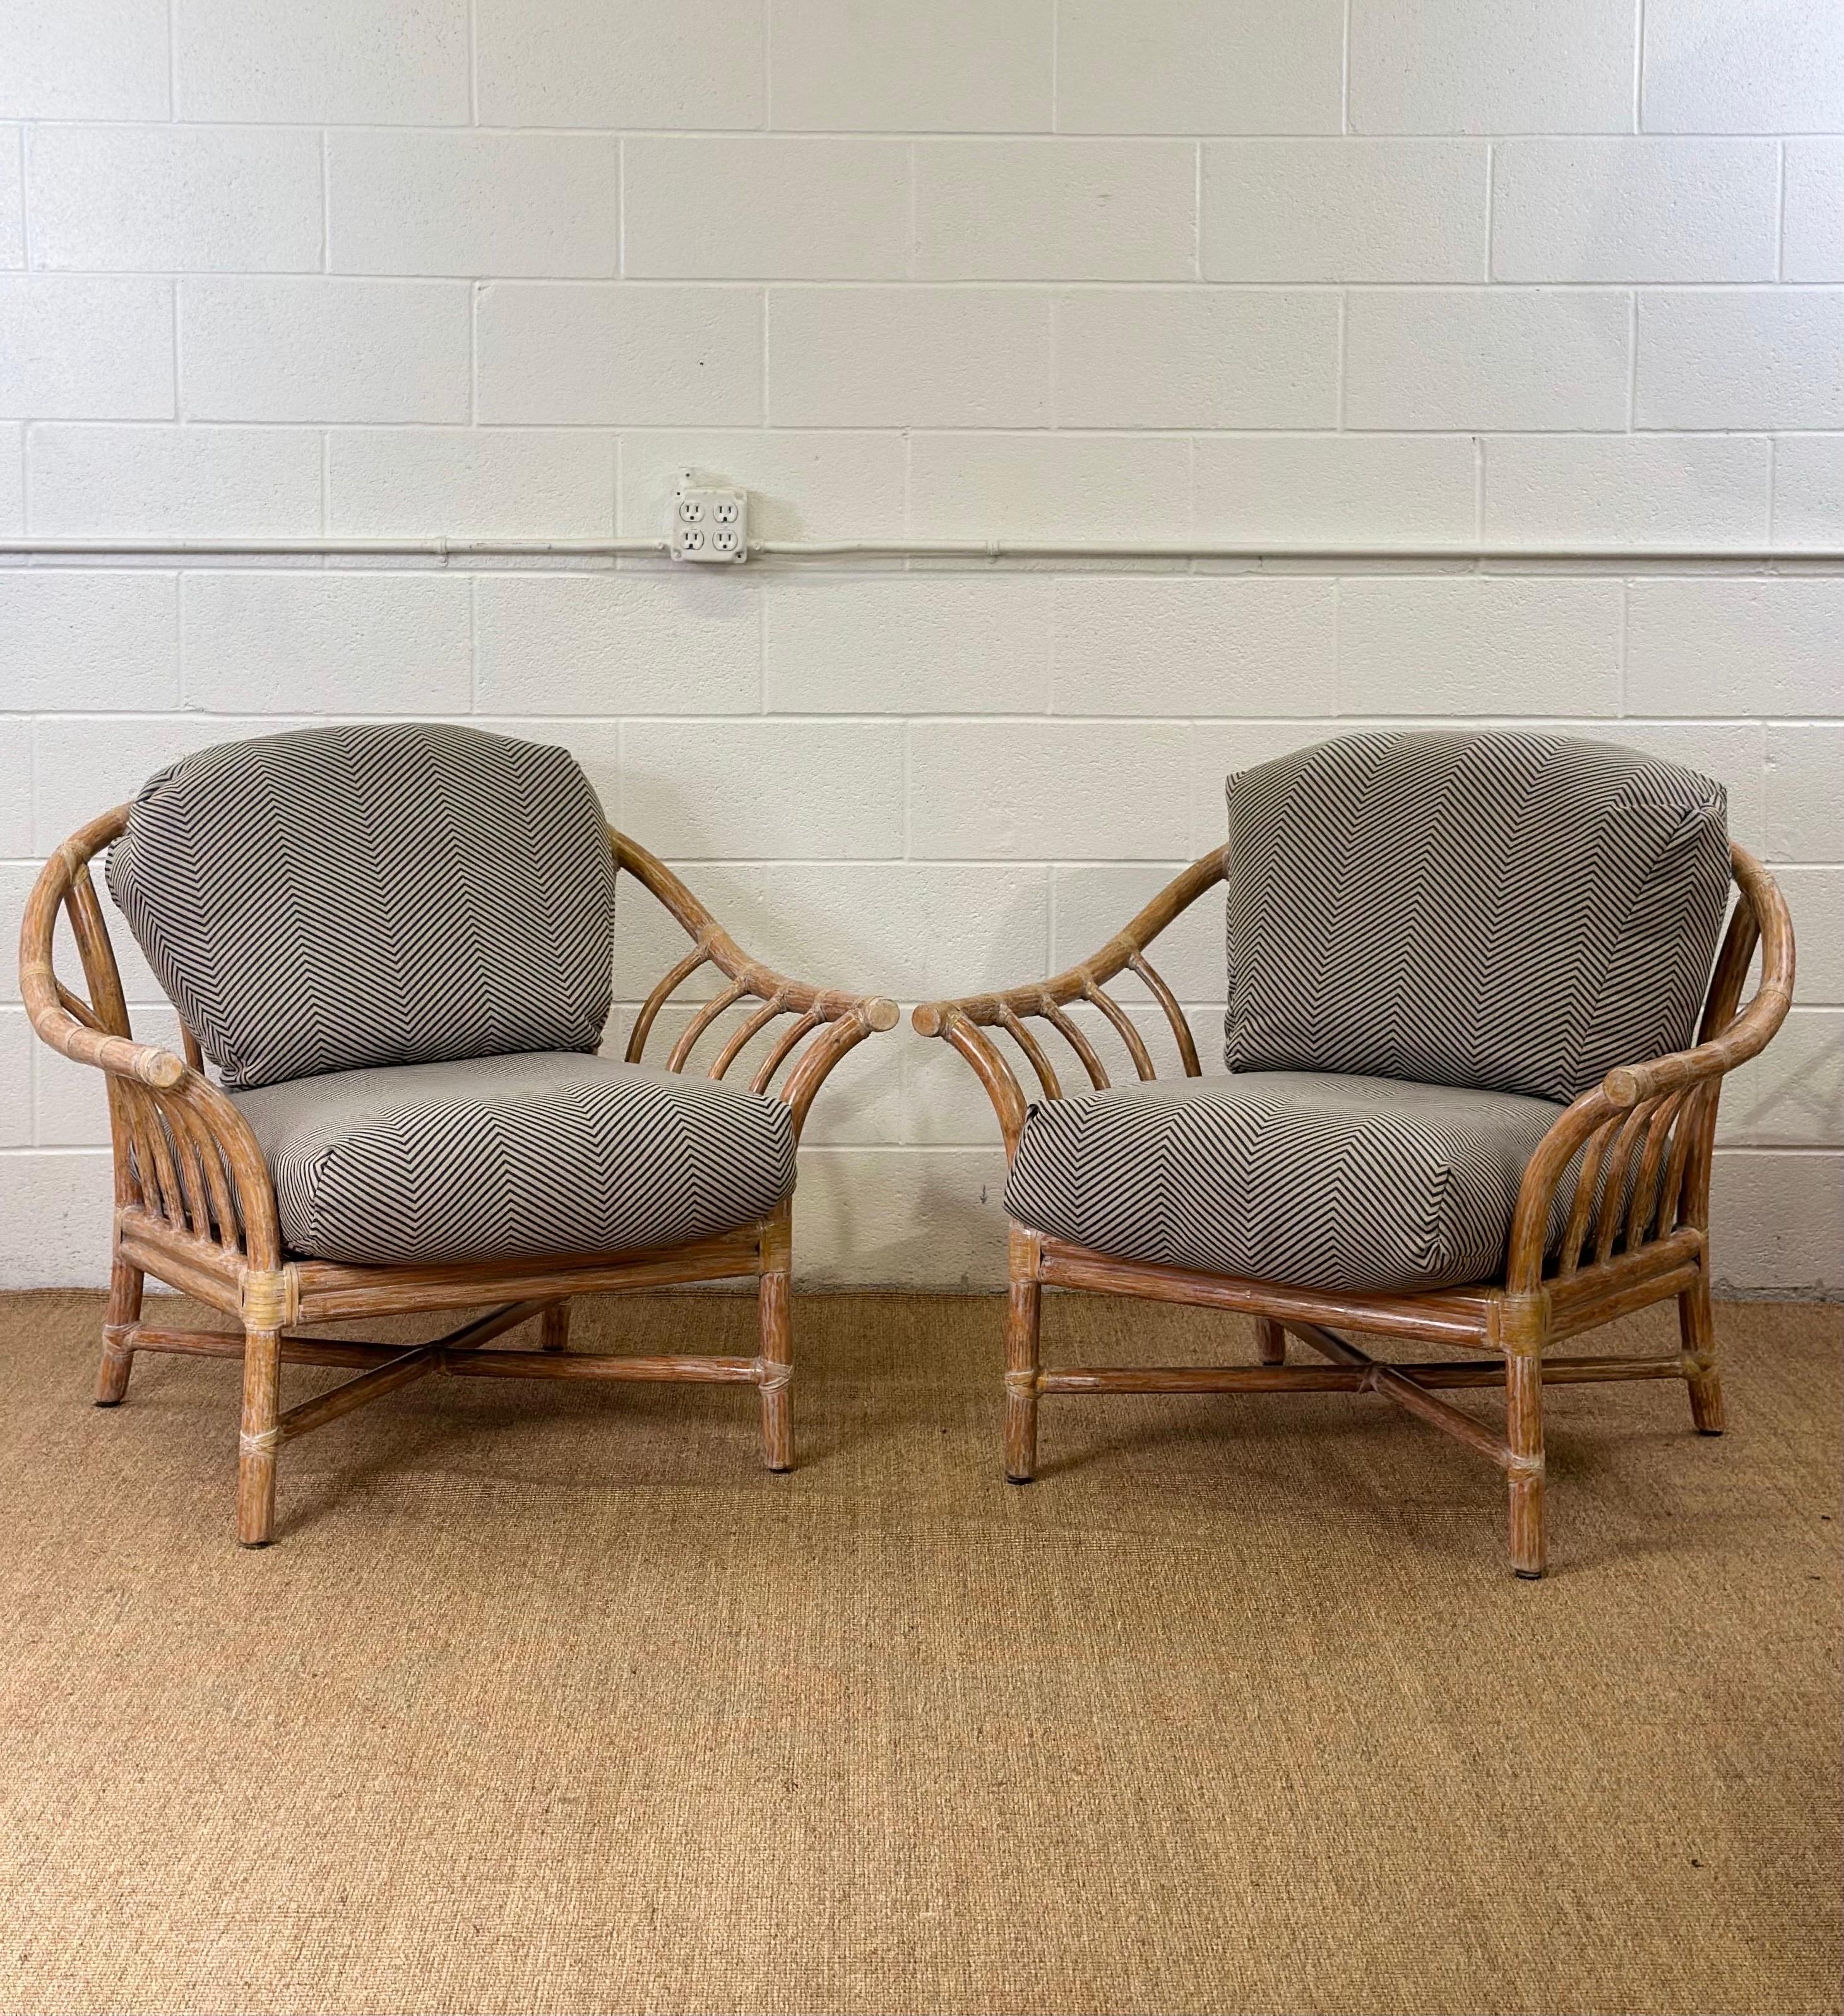 Late 20th Century Vintage McGuire Cerused Rattan Lounge Chairs with Ottomans – Set of 4 For Sale